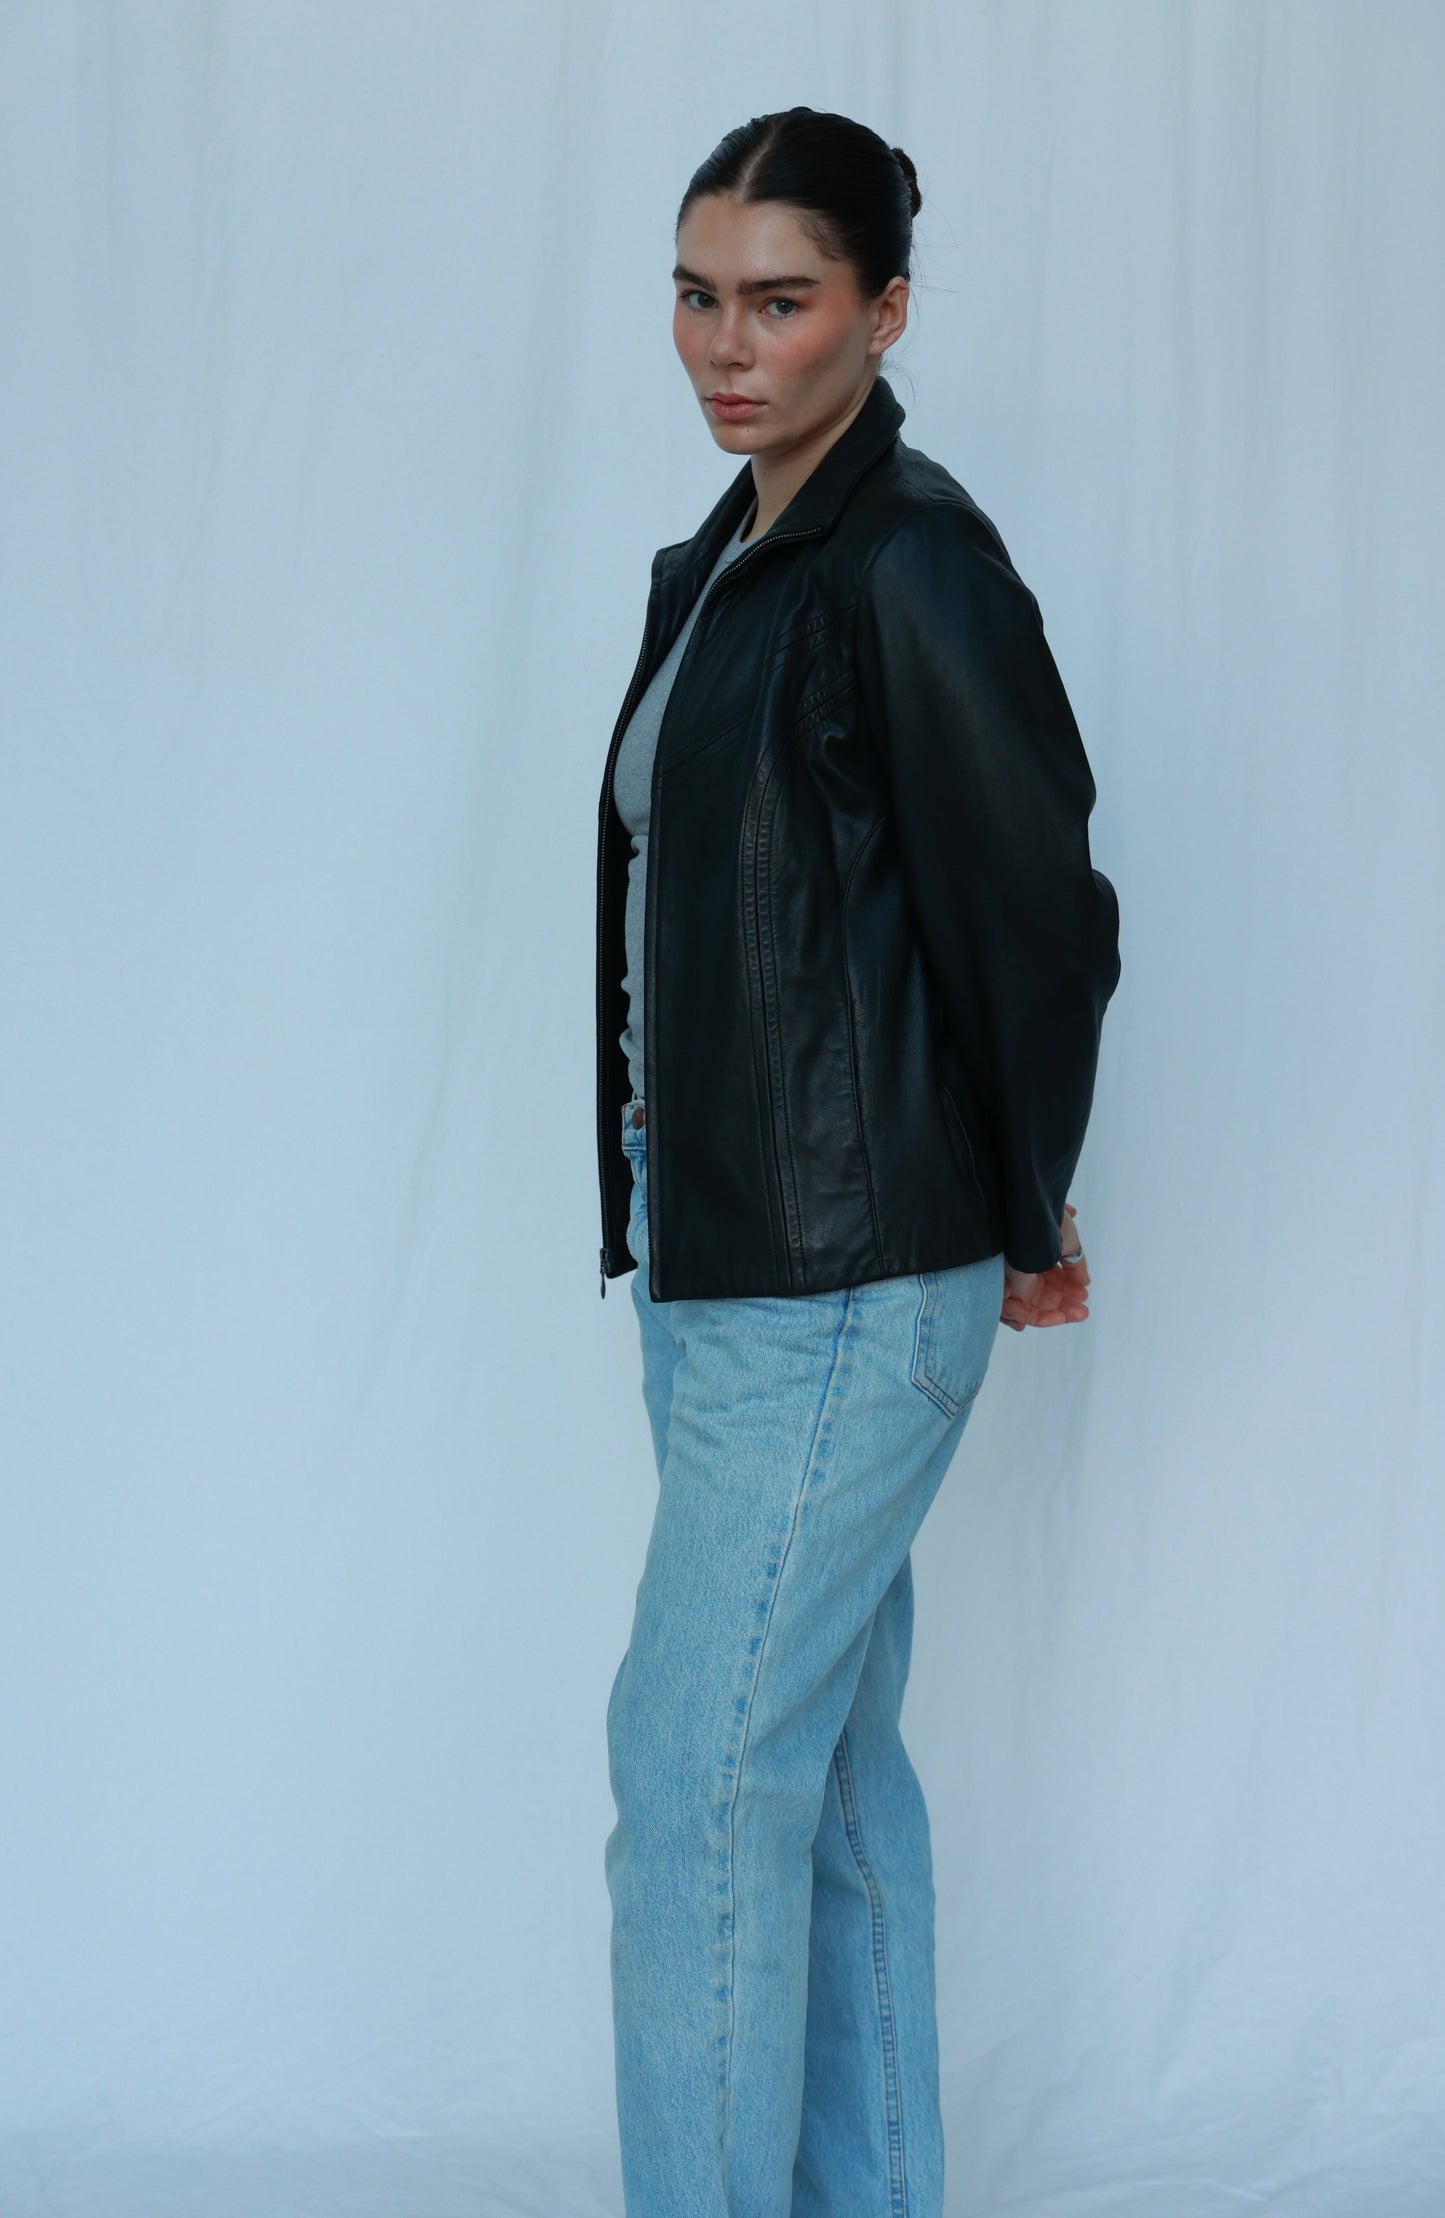 The image features a girl standing against a white backdrop. She's wearing a stylish black leather jacket over a grey tank top, paired with classic blue jeans. The ensemble exudes a trendy and casual vibe, creating a fashionable yet comfortable look.